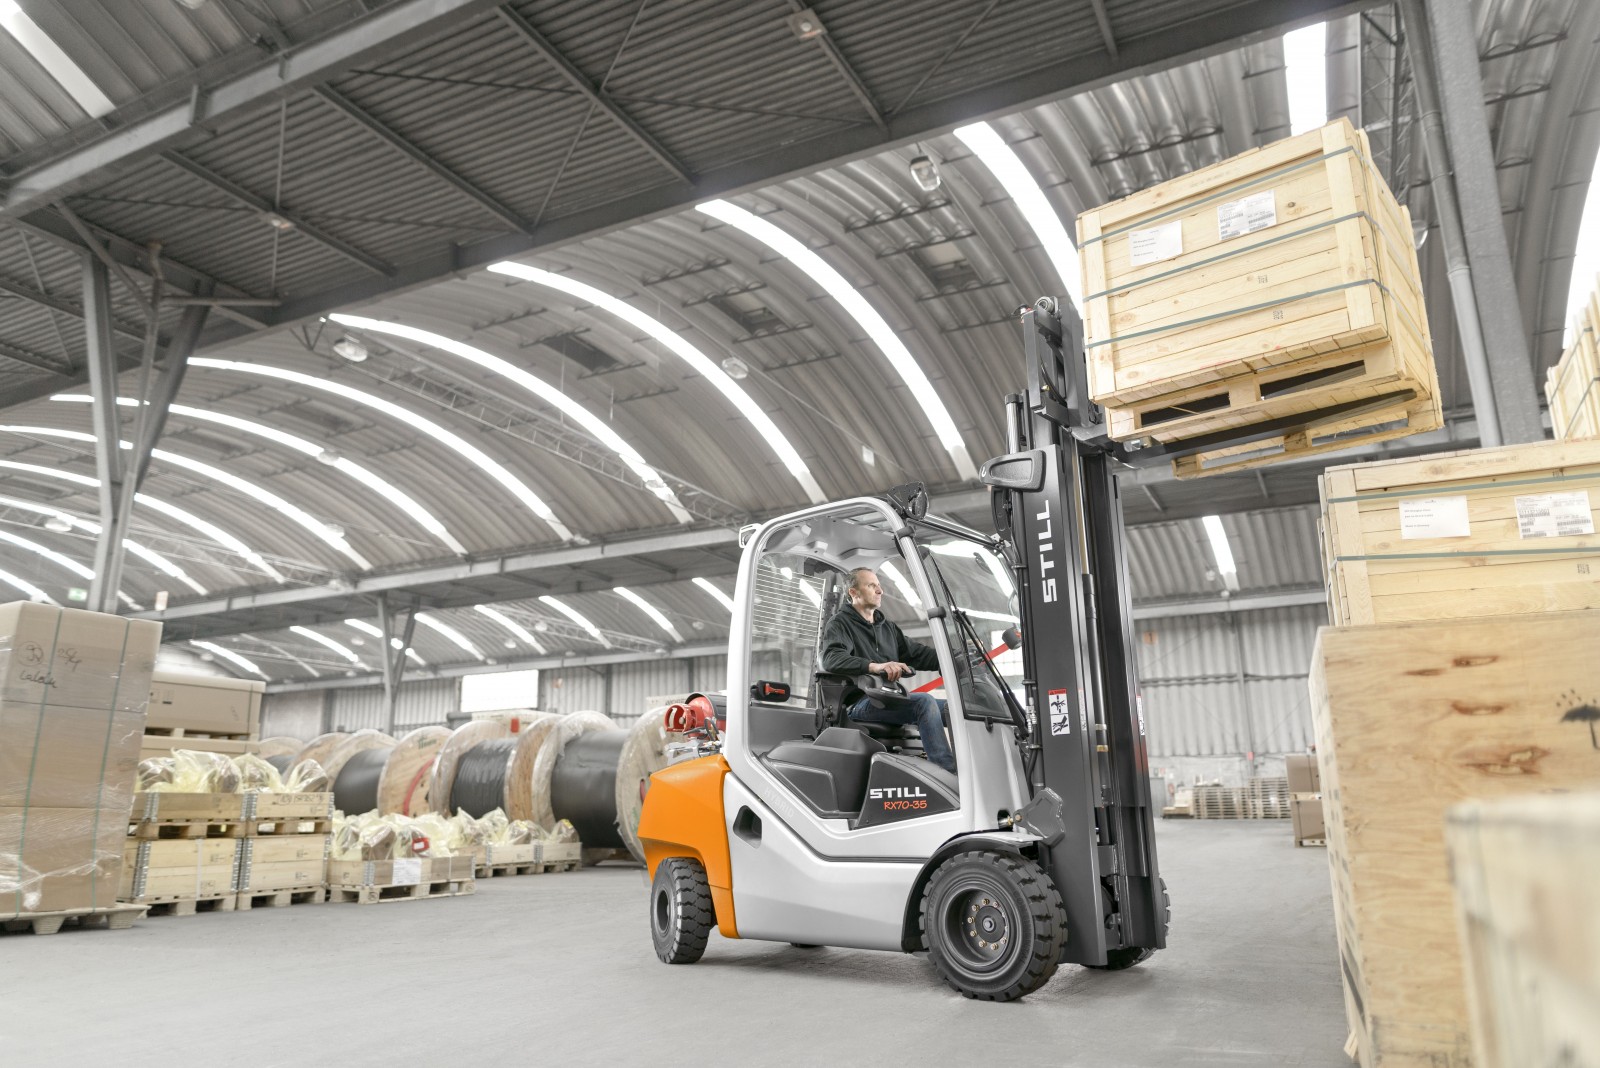 How many types of forklifts